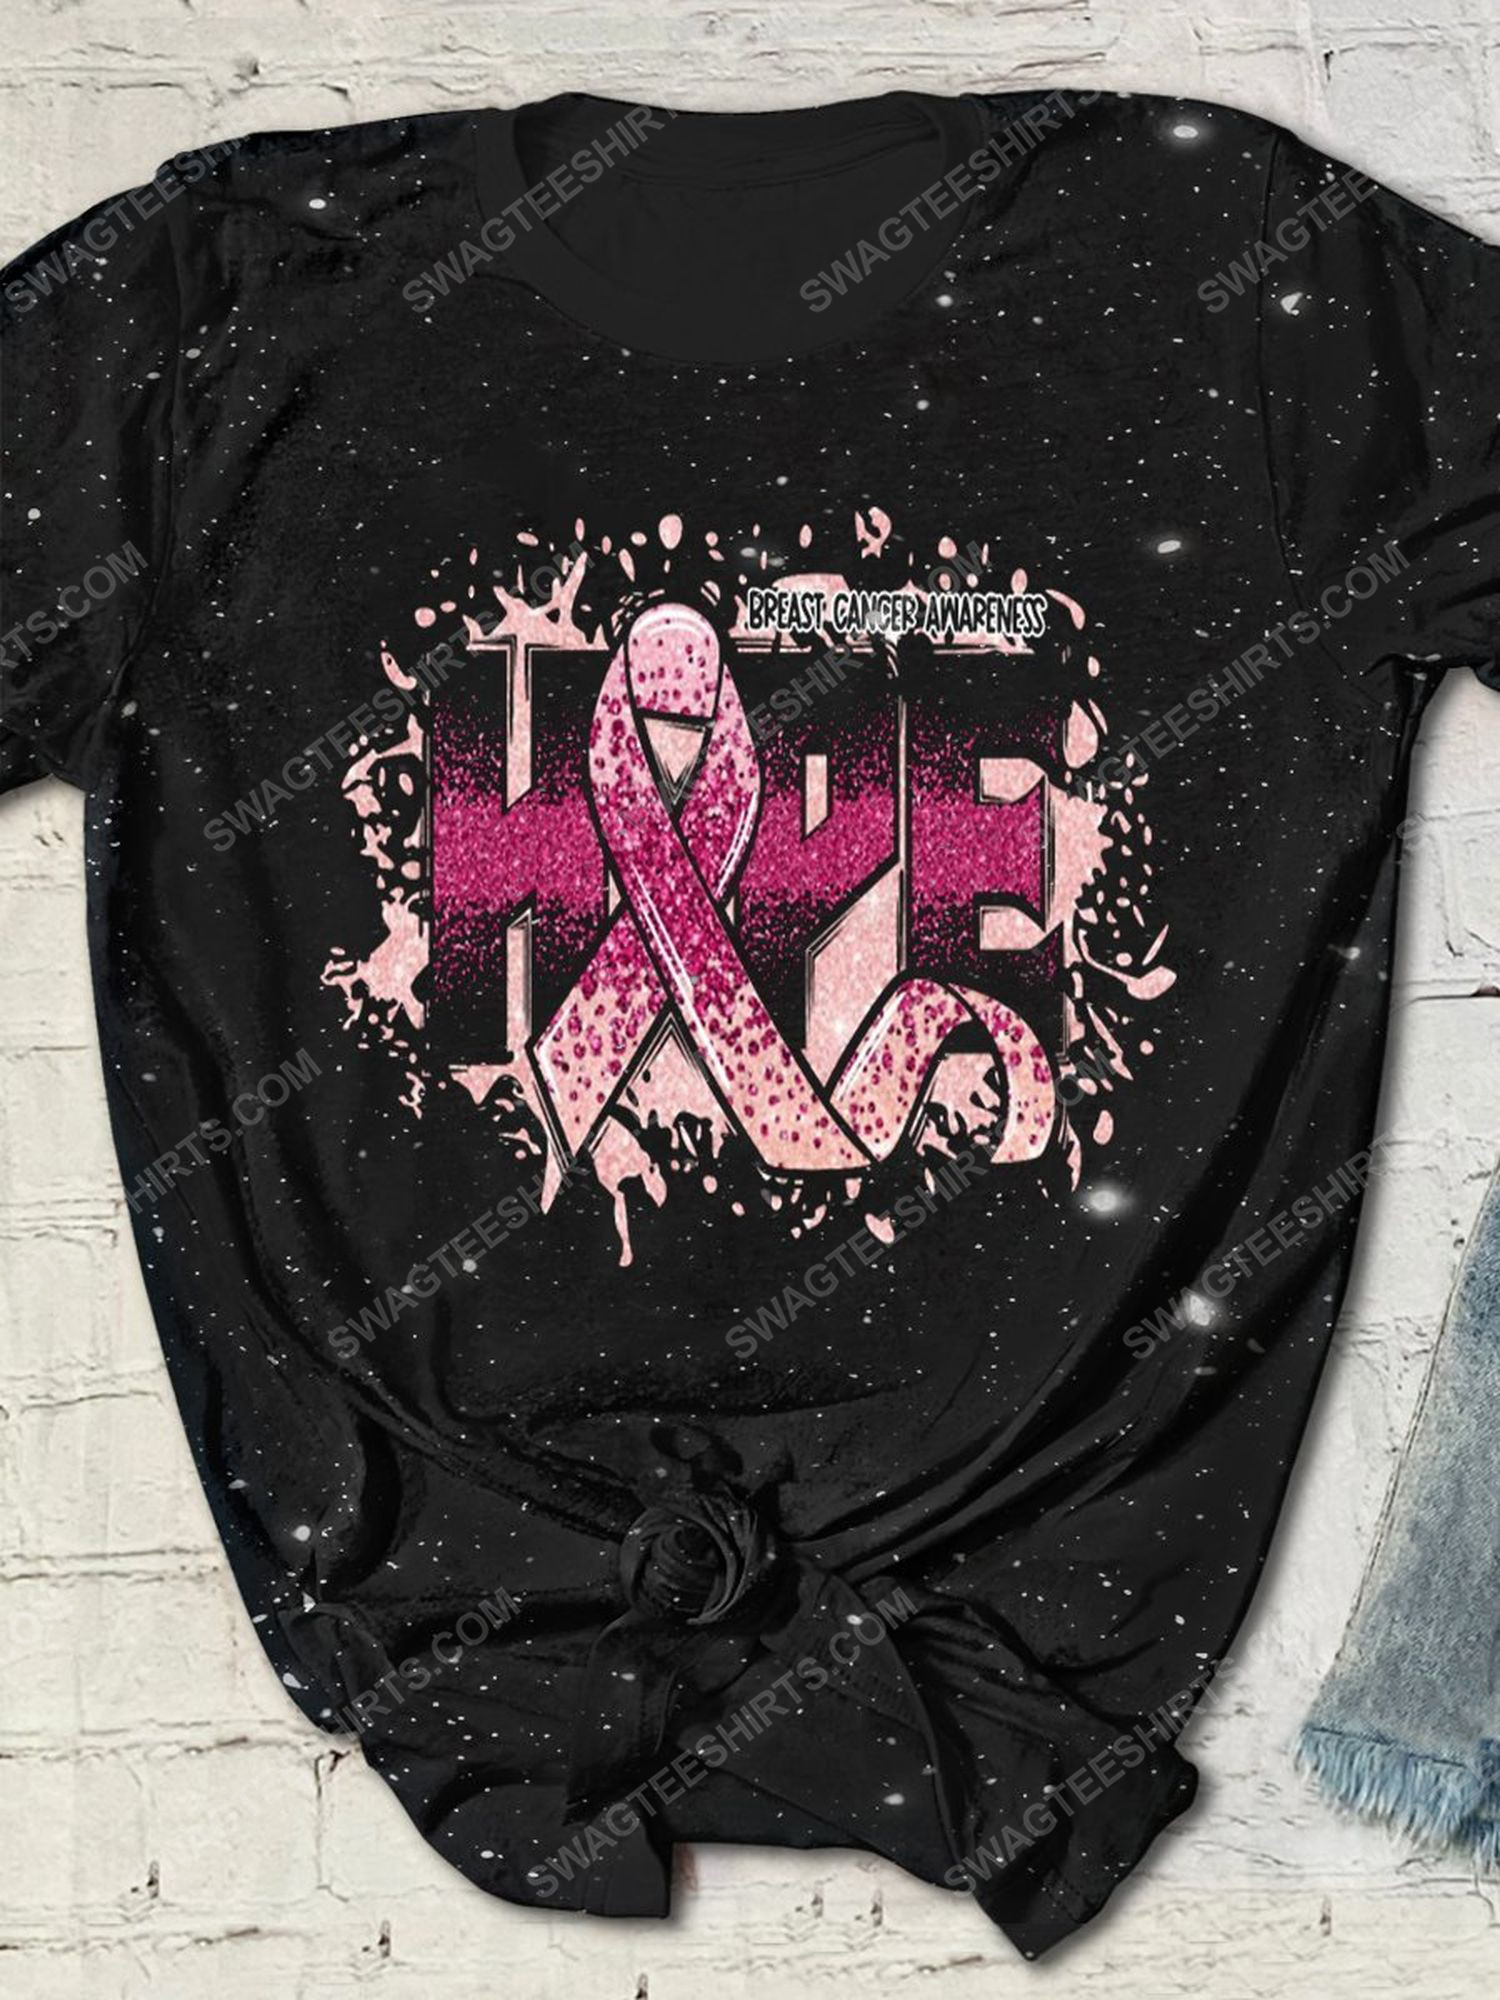 Breast cancer awareness hope bleached shirt 1 - Copy (3)